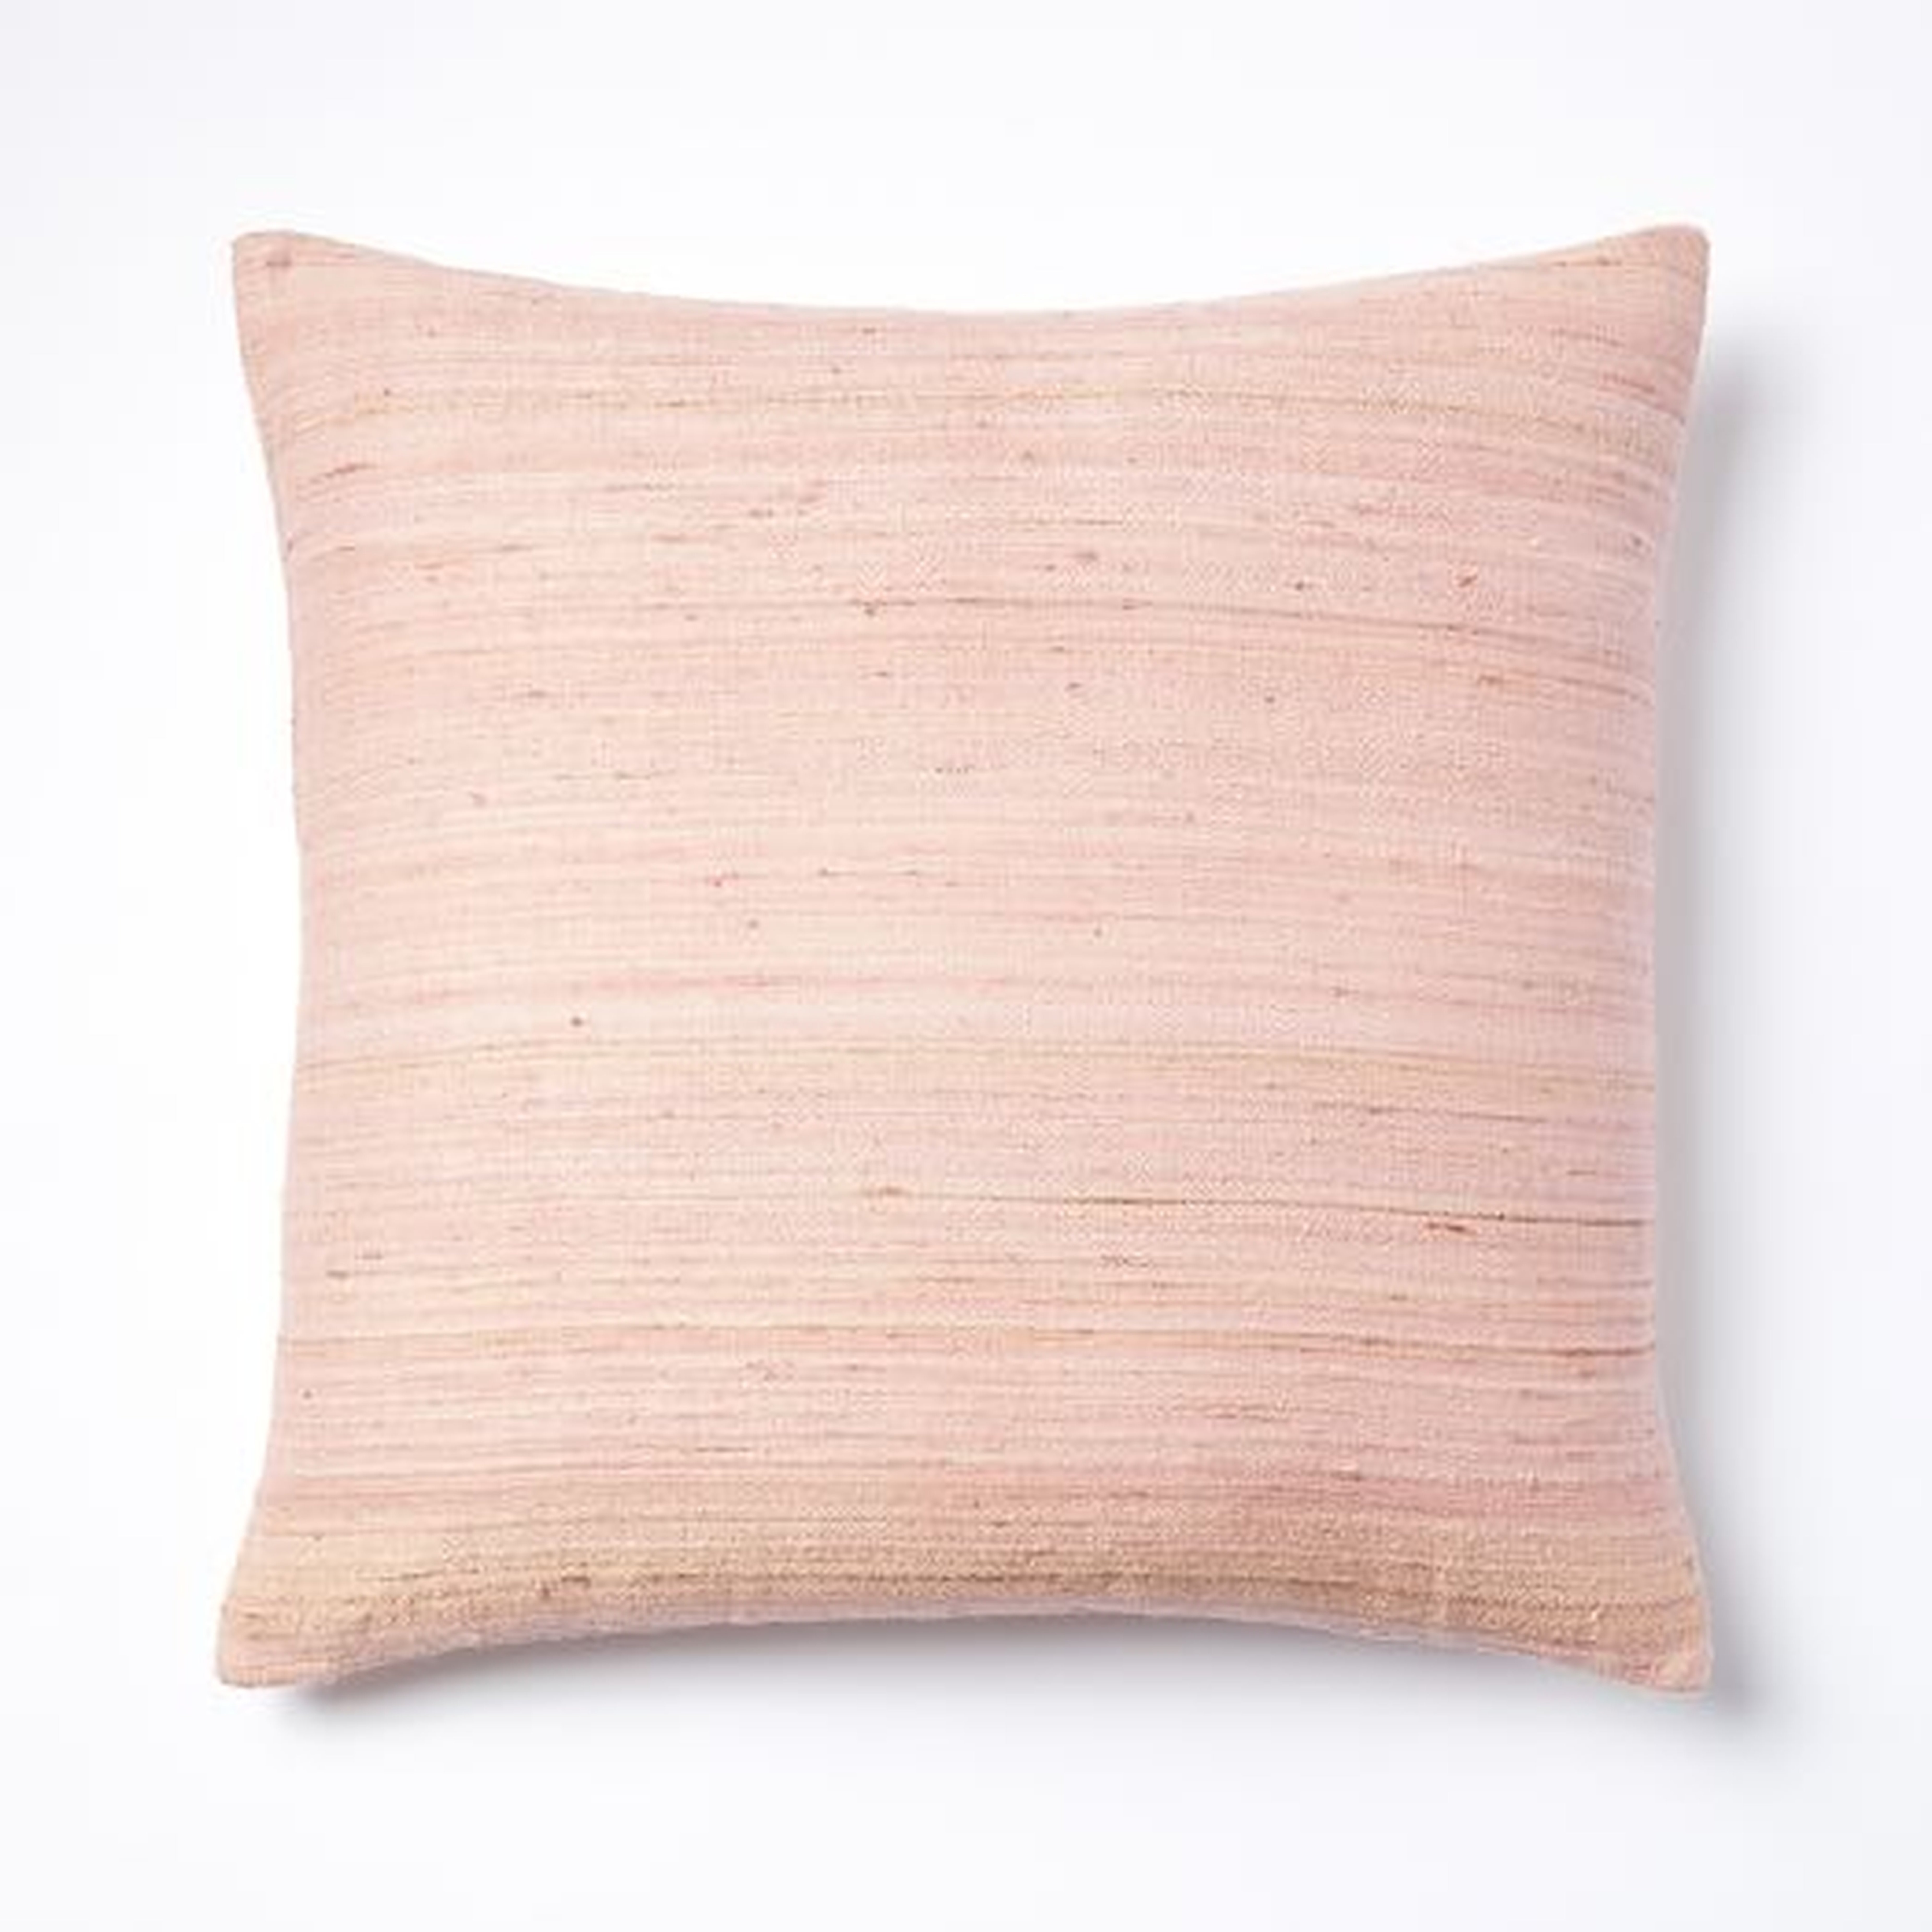 Woven Silk Pillow Cover in Pink Sorbet - West Elm